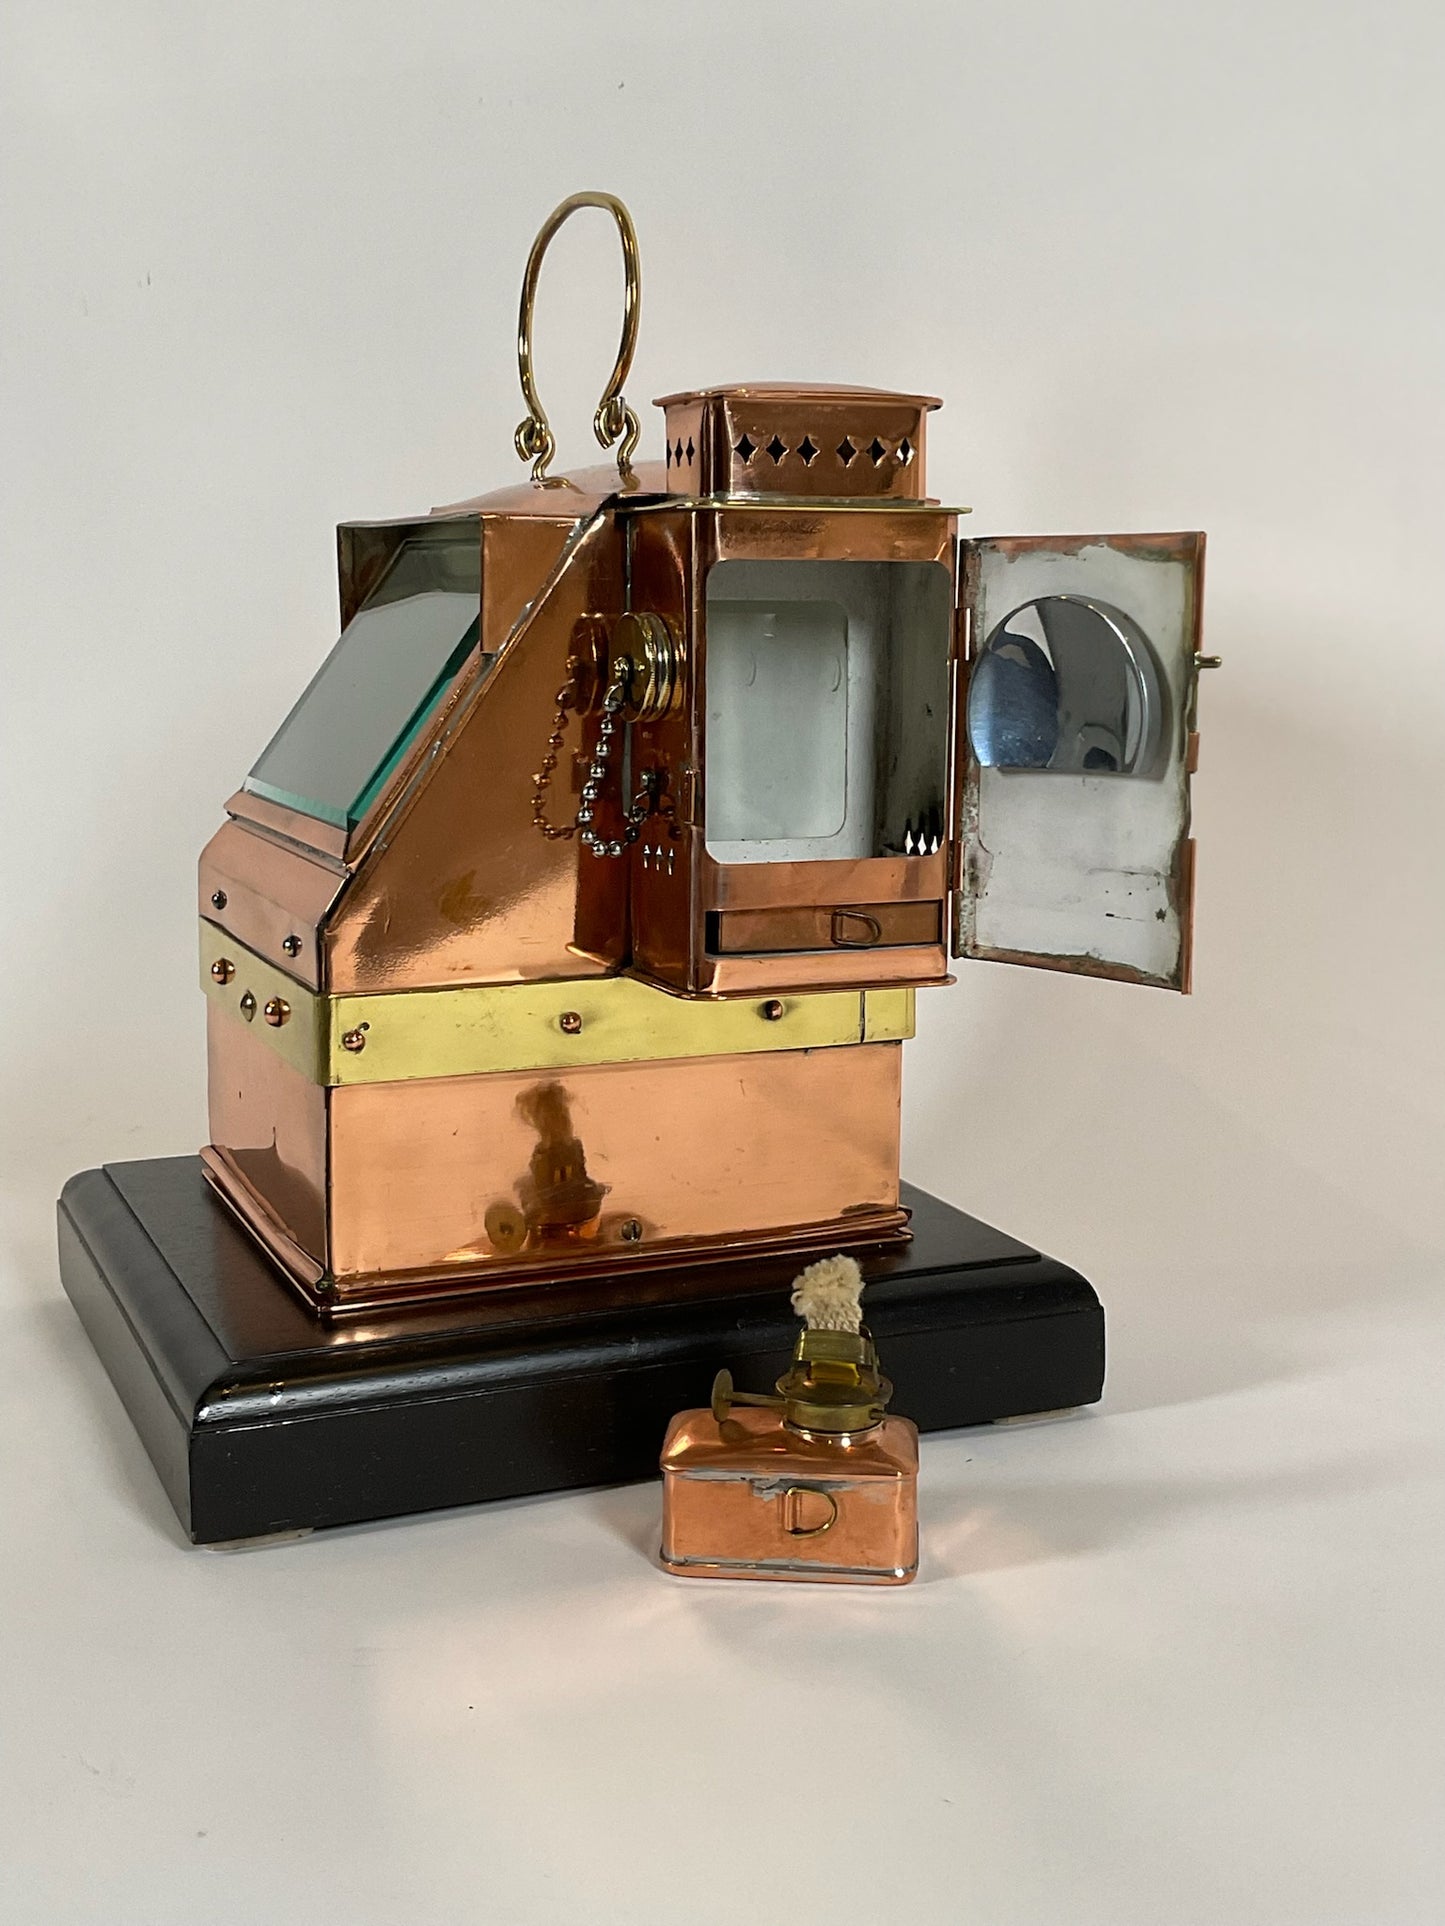 Copper Boat Binnacle with Compass